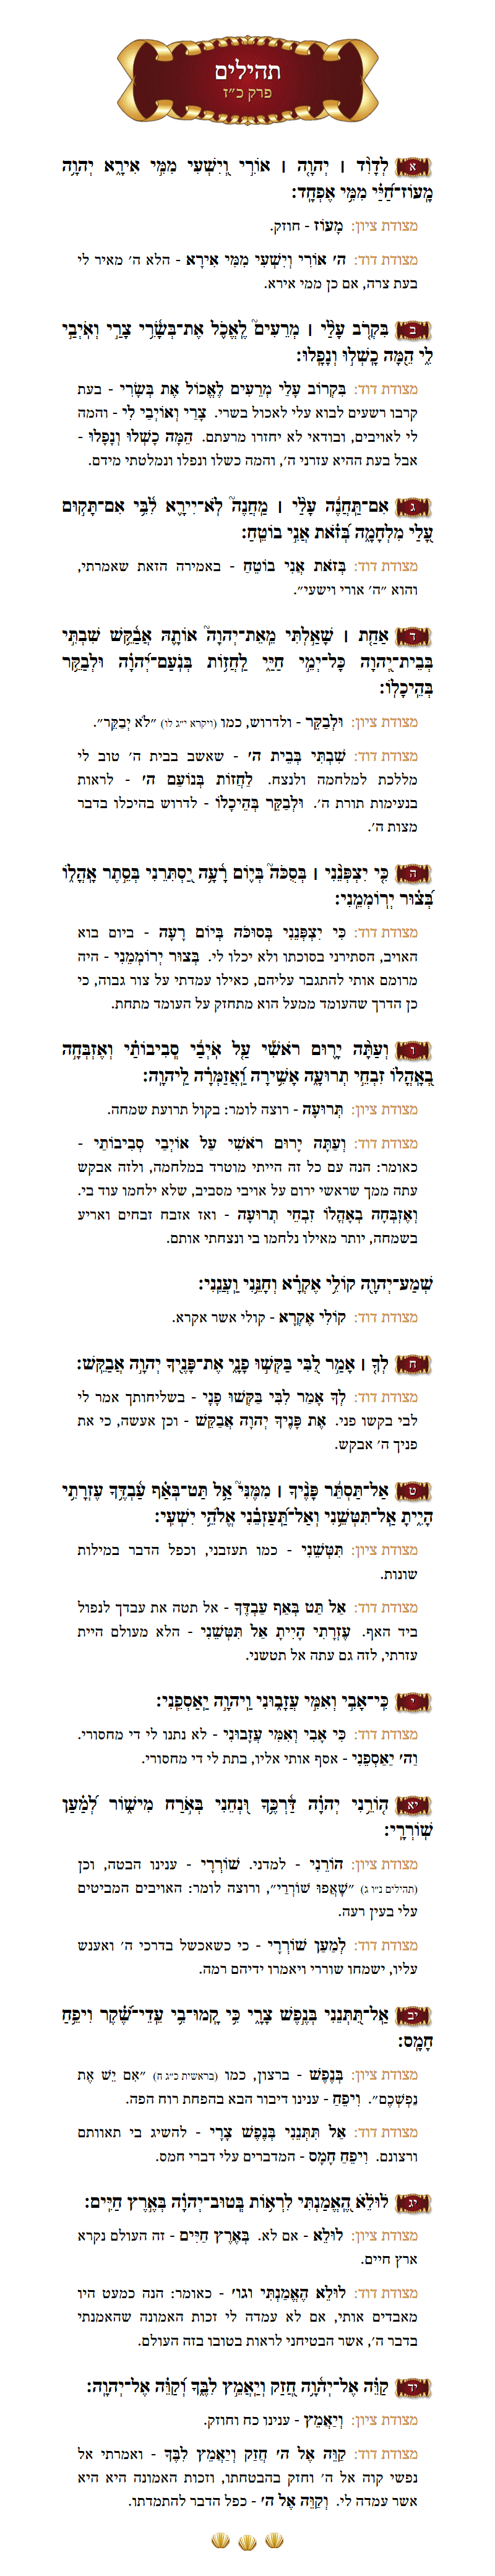 Sefer Tehillim Chapter 72 with commentary